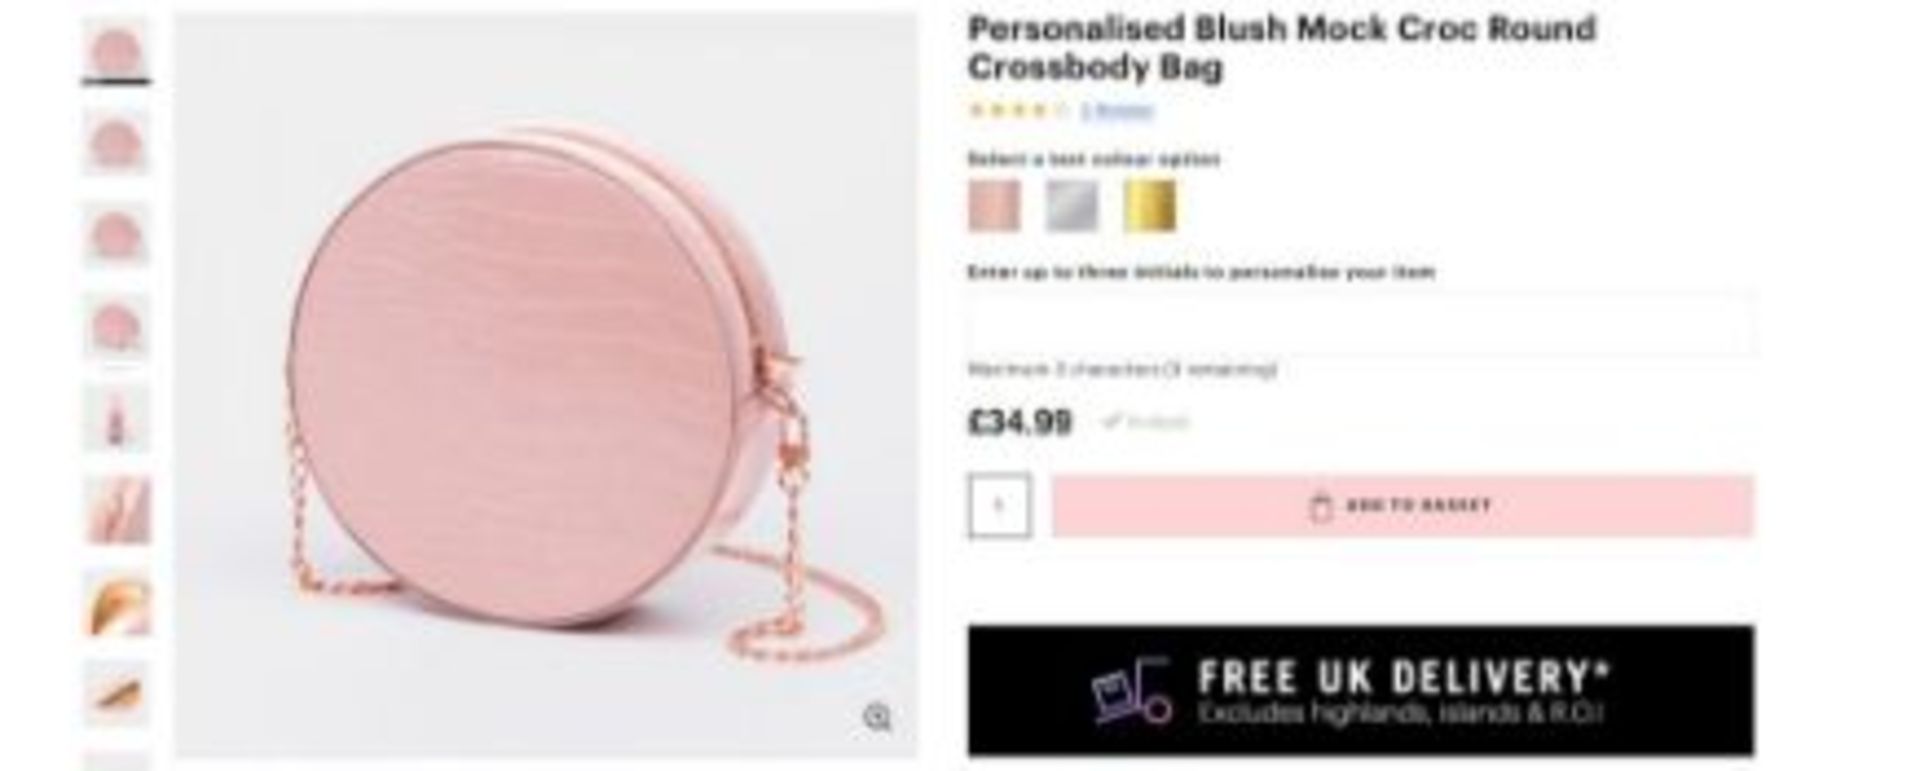 3 x NEW BOXED Beauti Mock Croc Round Crossbody Luxury Bag -Blush. RRP £34.99 each. NOTE: ITEM IS NOT